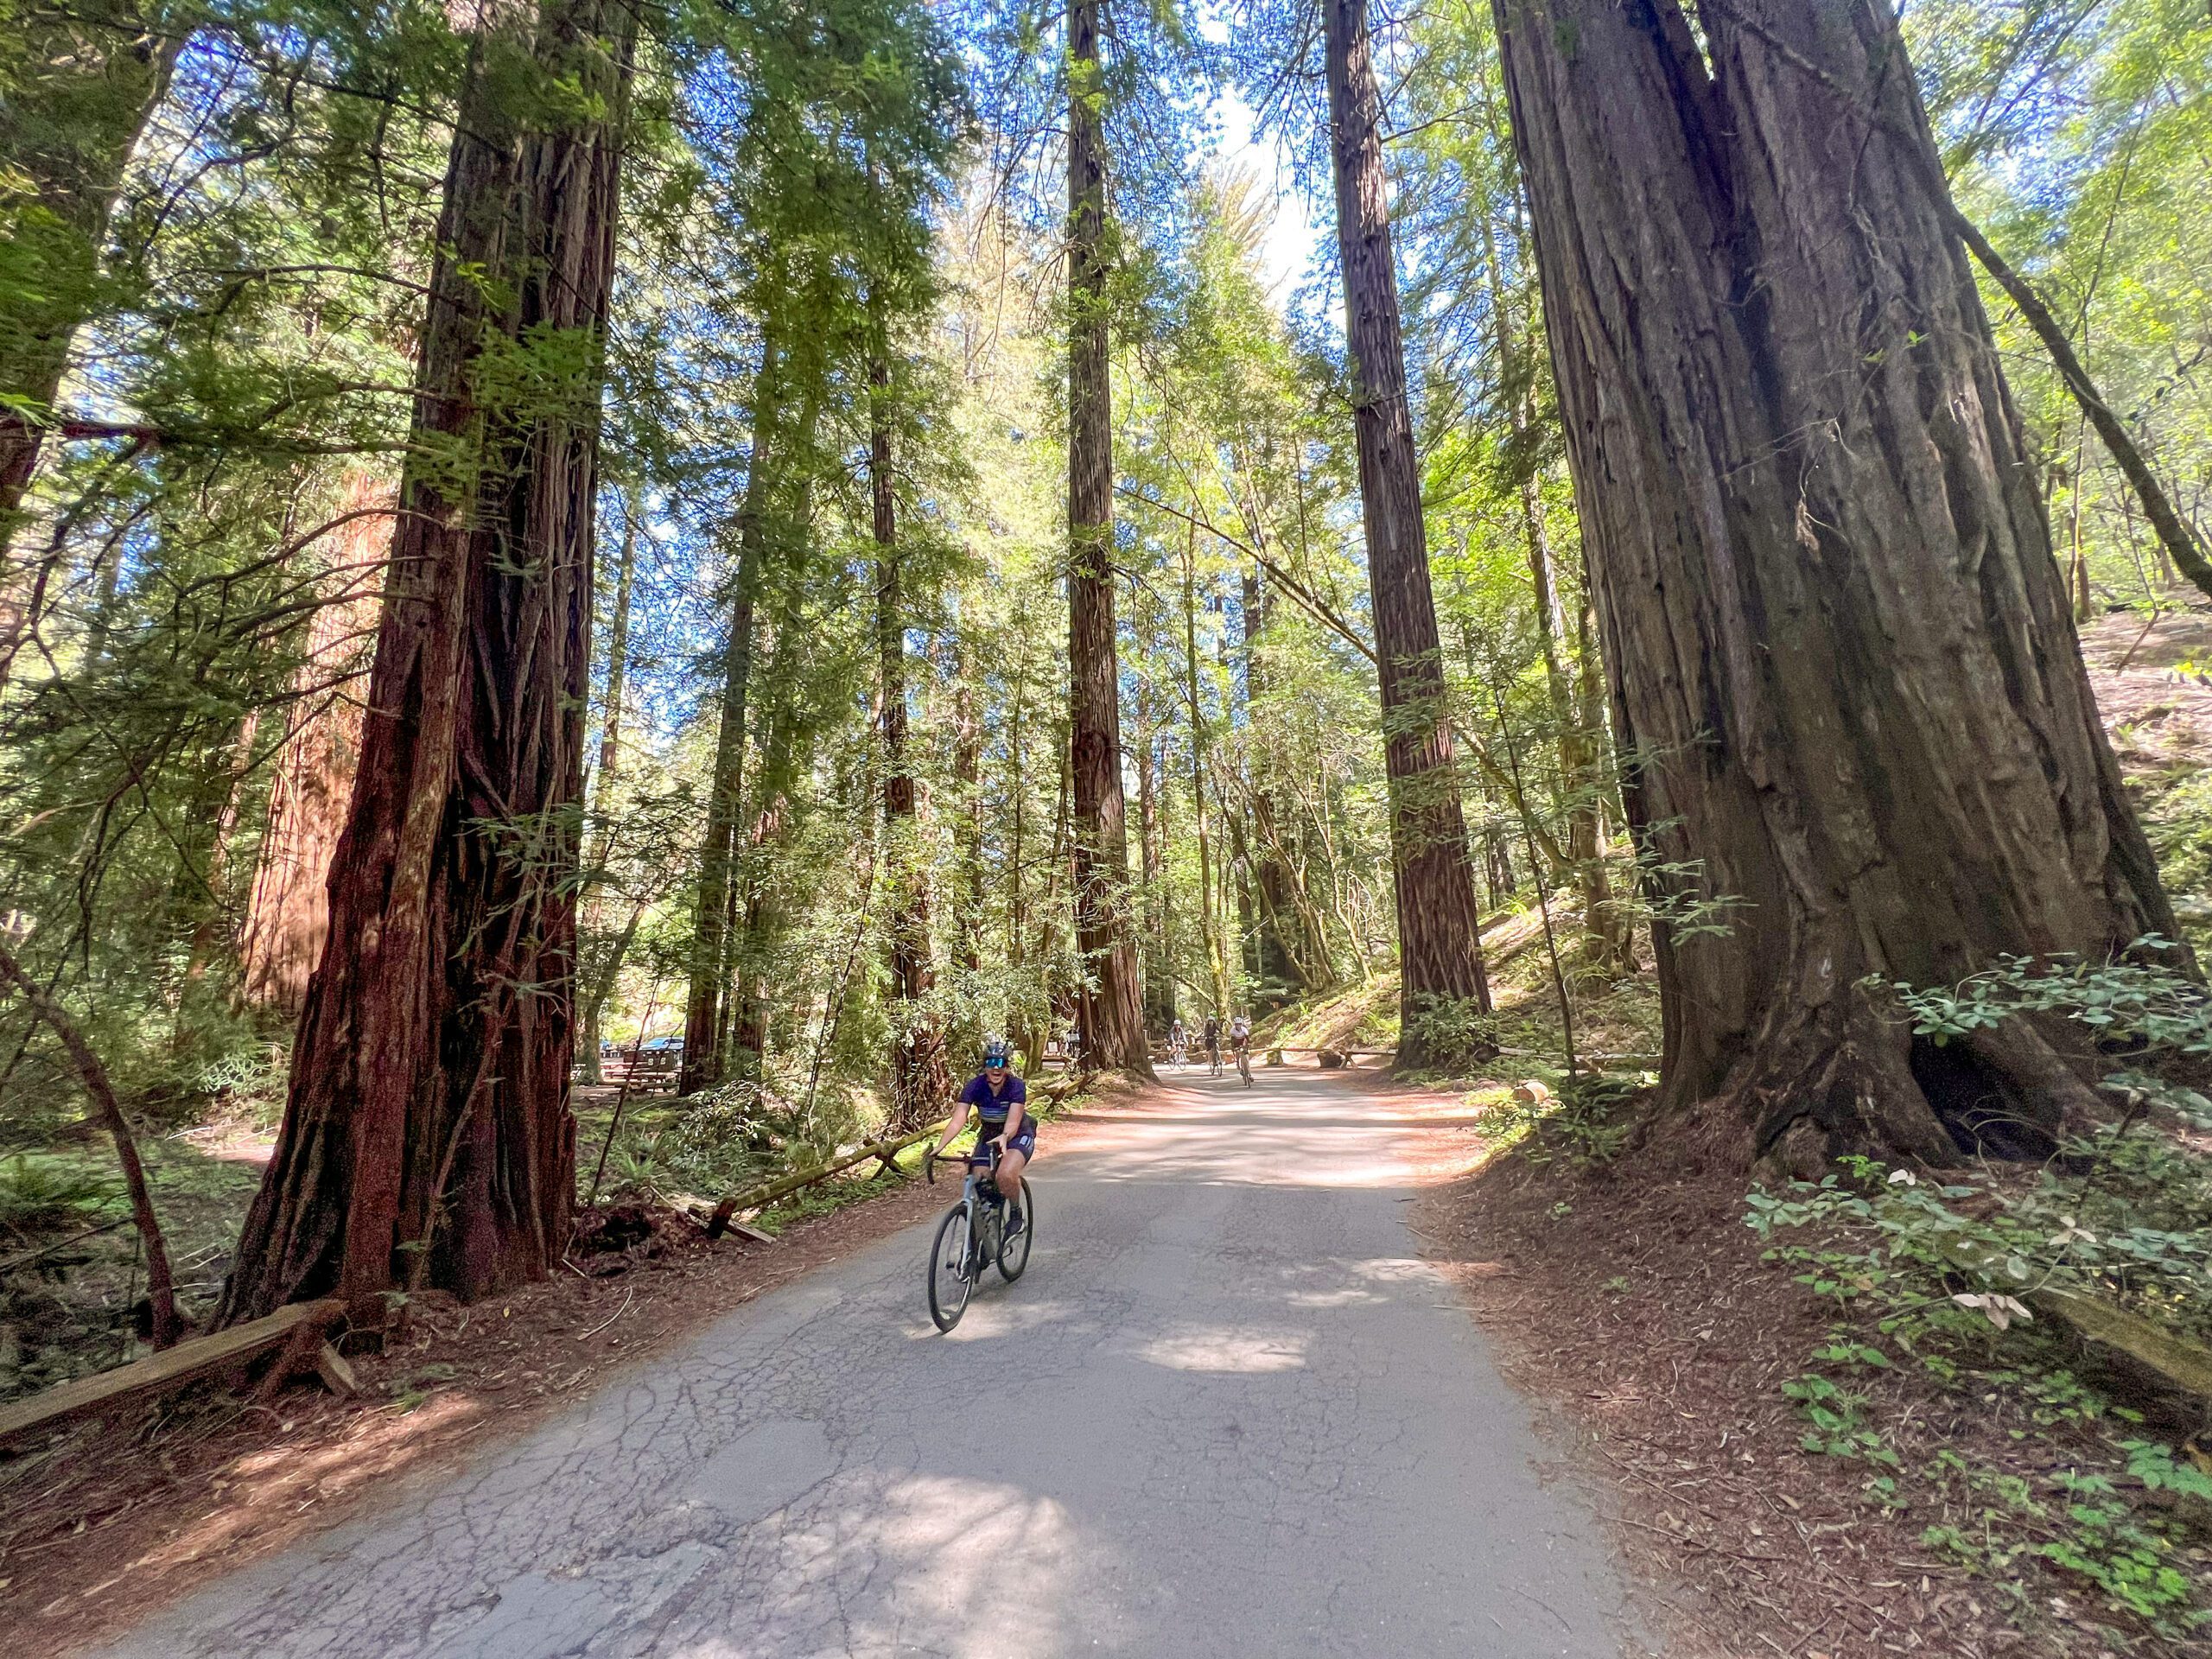 A cyclist rides through the Redwood forest